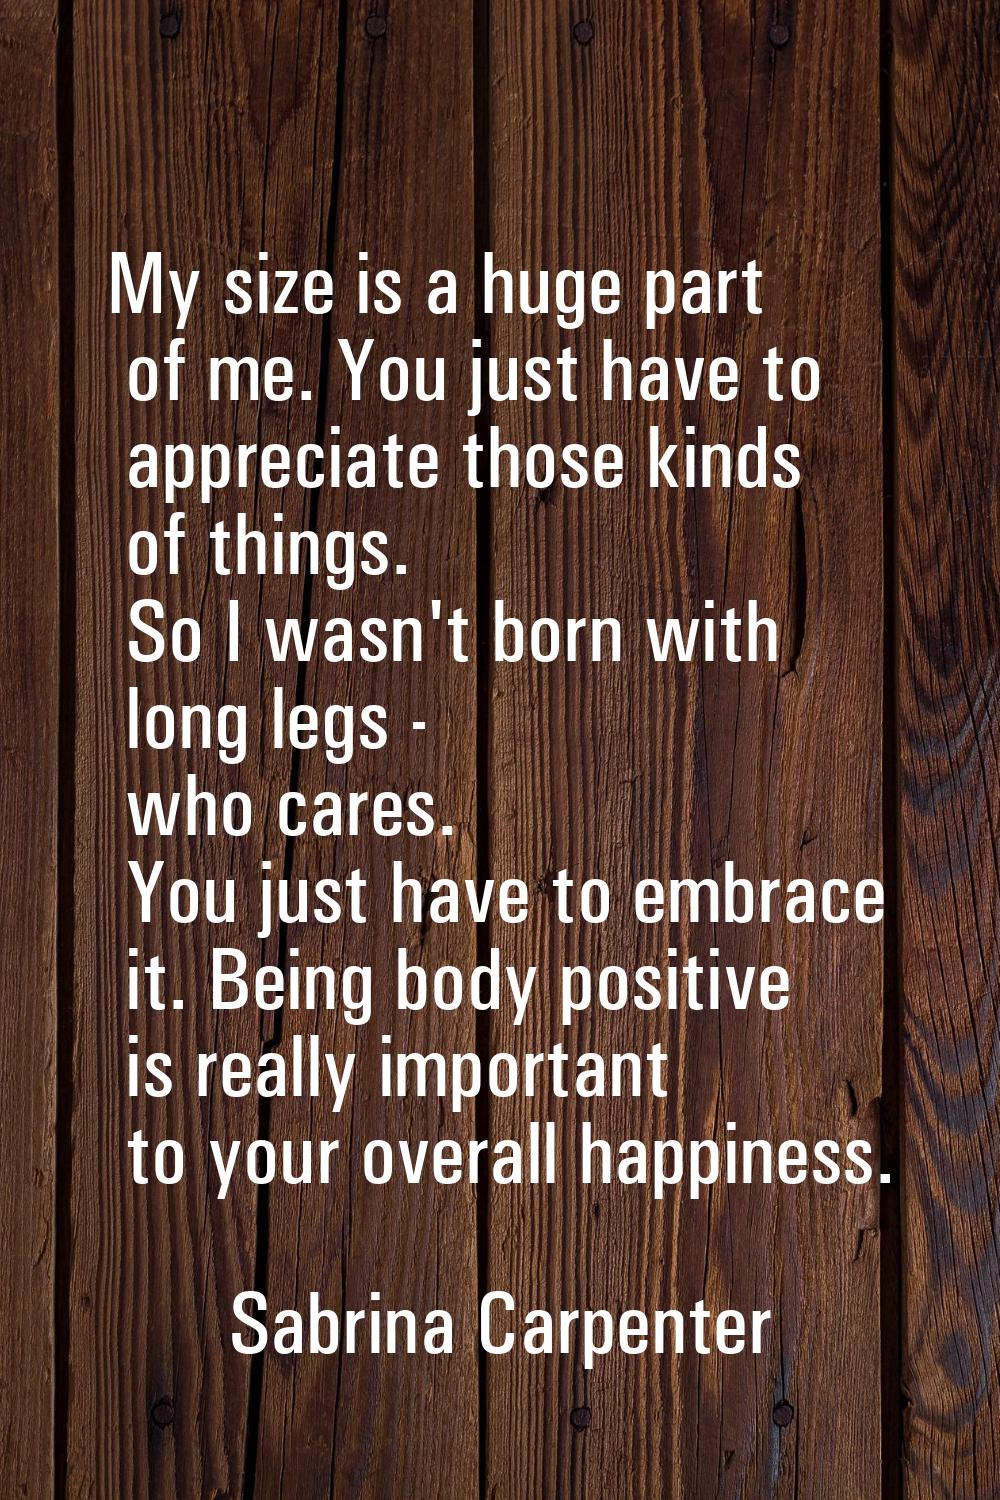 My size is a huge part of me. You just have to appreciate those kinds of things. So I wasn't born w